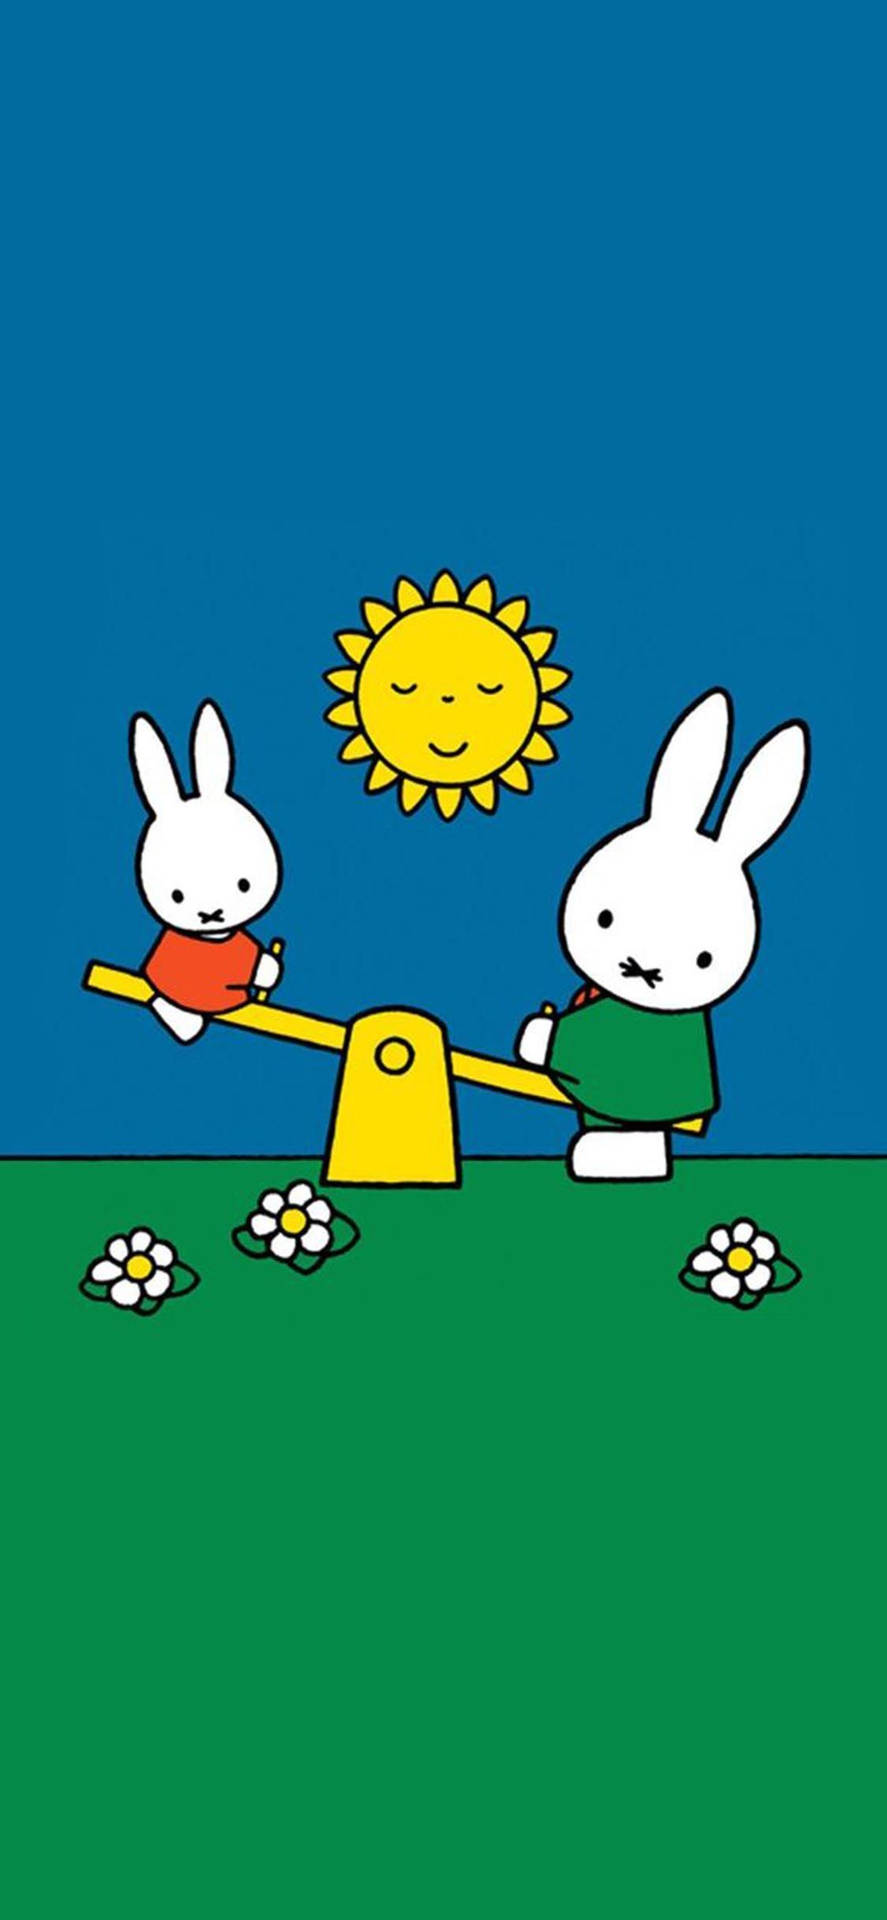 Miffy Seesaw Playground Picture